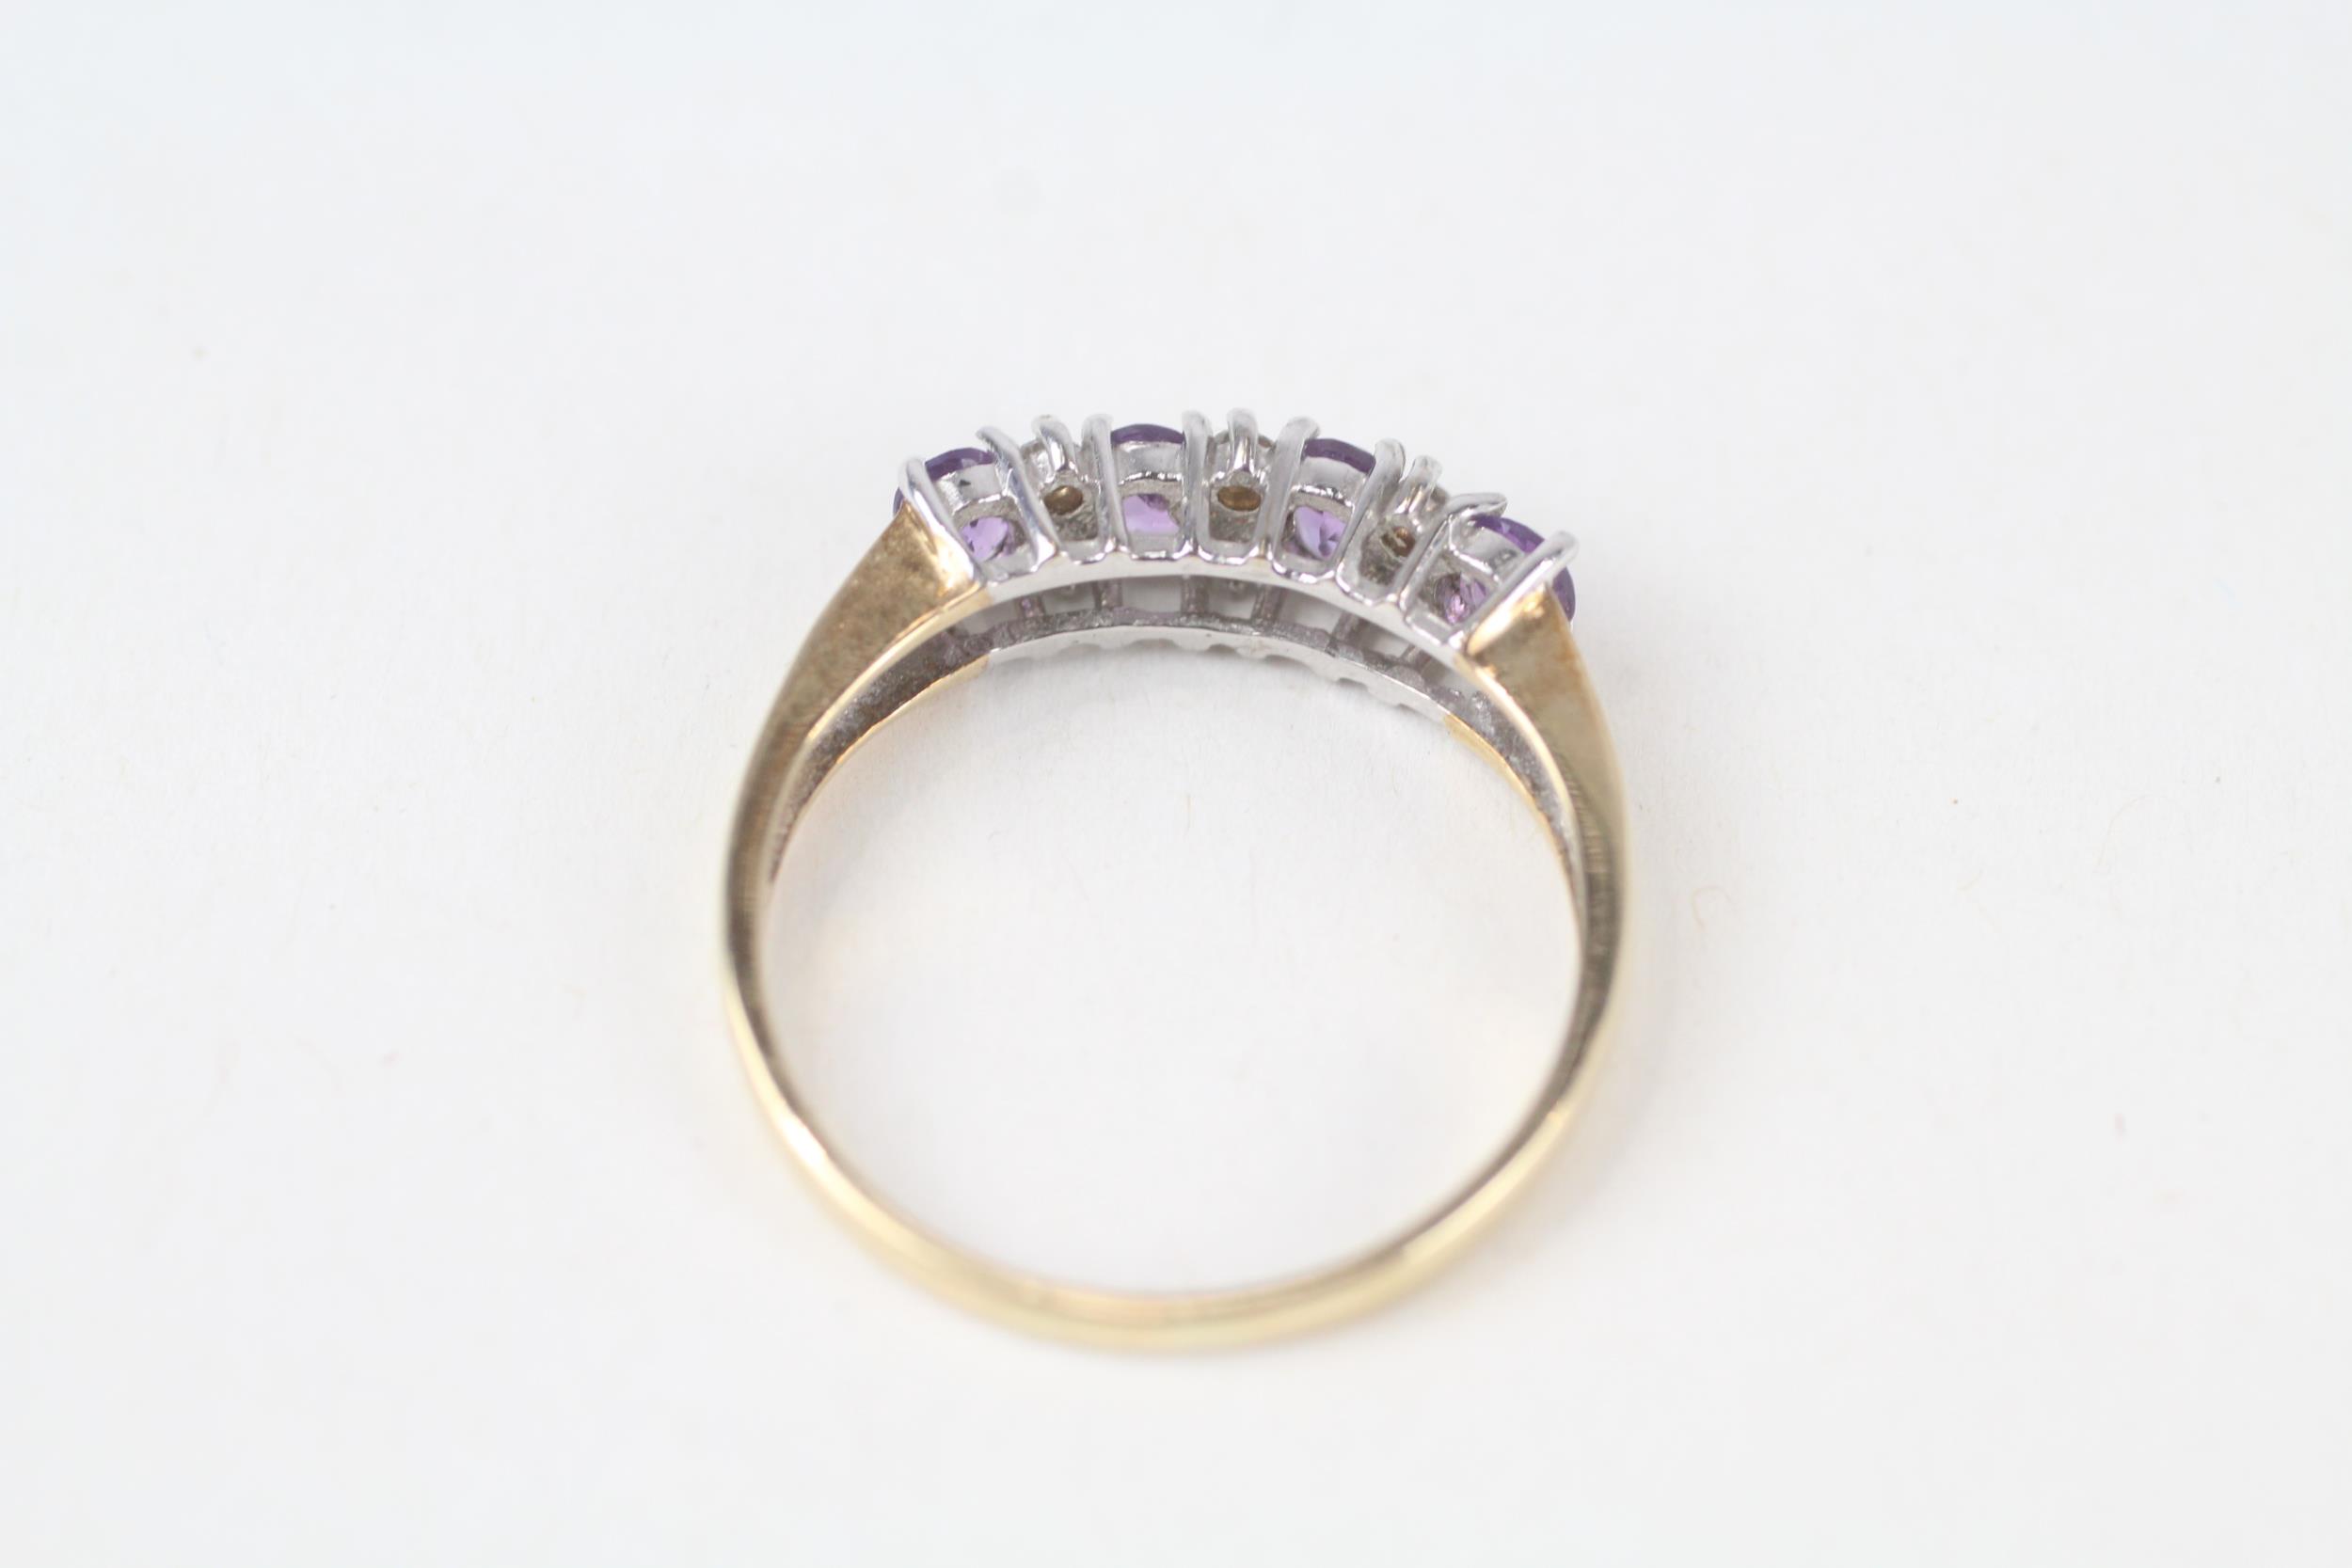 9ct gold amethyst four stone ring with cubic zirconia dividers Size R 1/2 2.6 g - Image 5 of 5